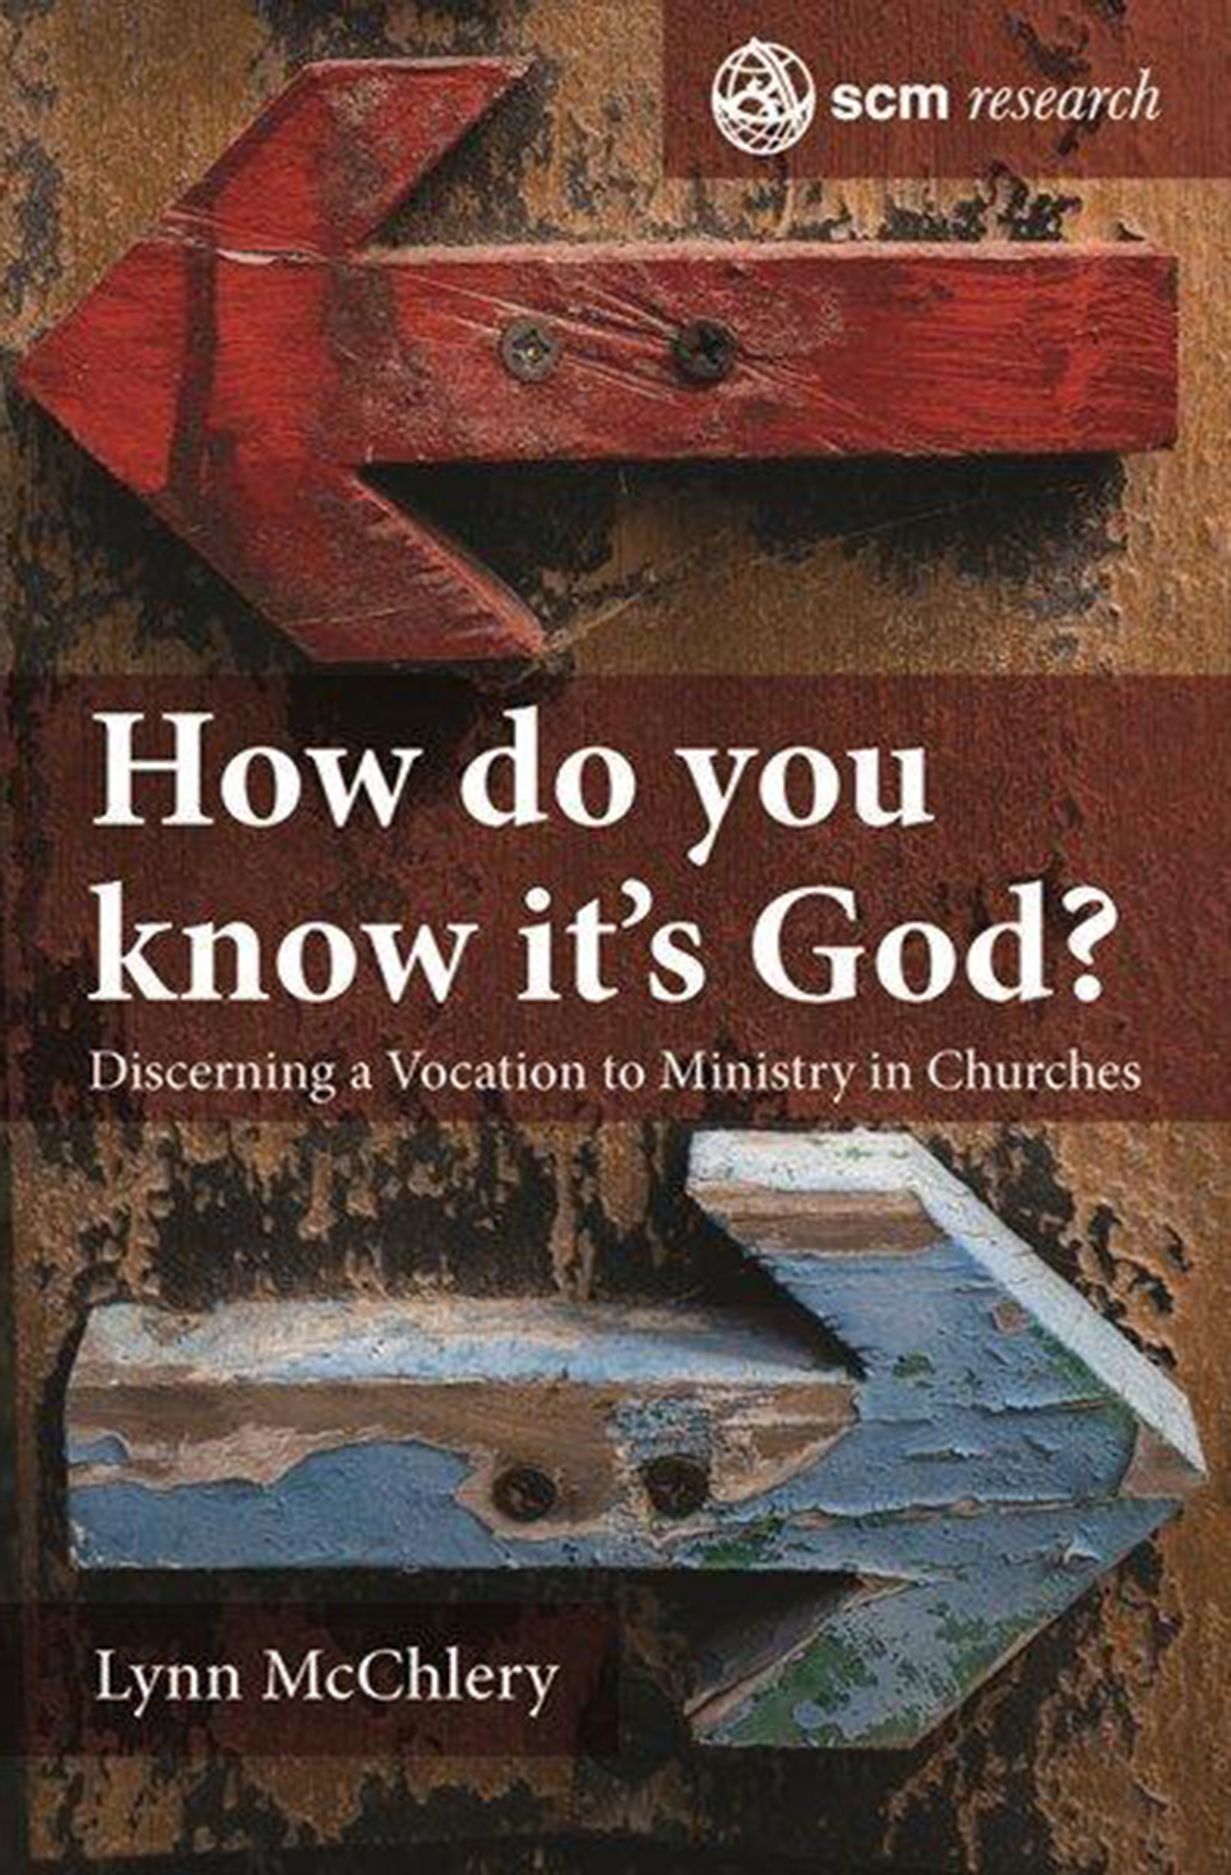 How do you know it’s God?: Discerning a Vocation to Ministry in Churches